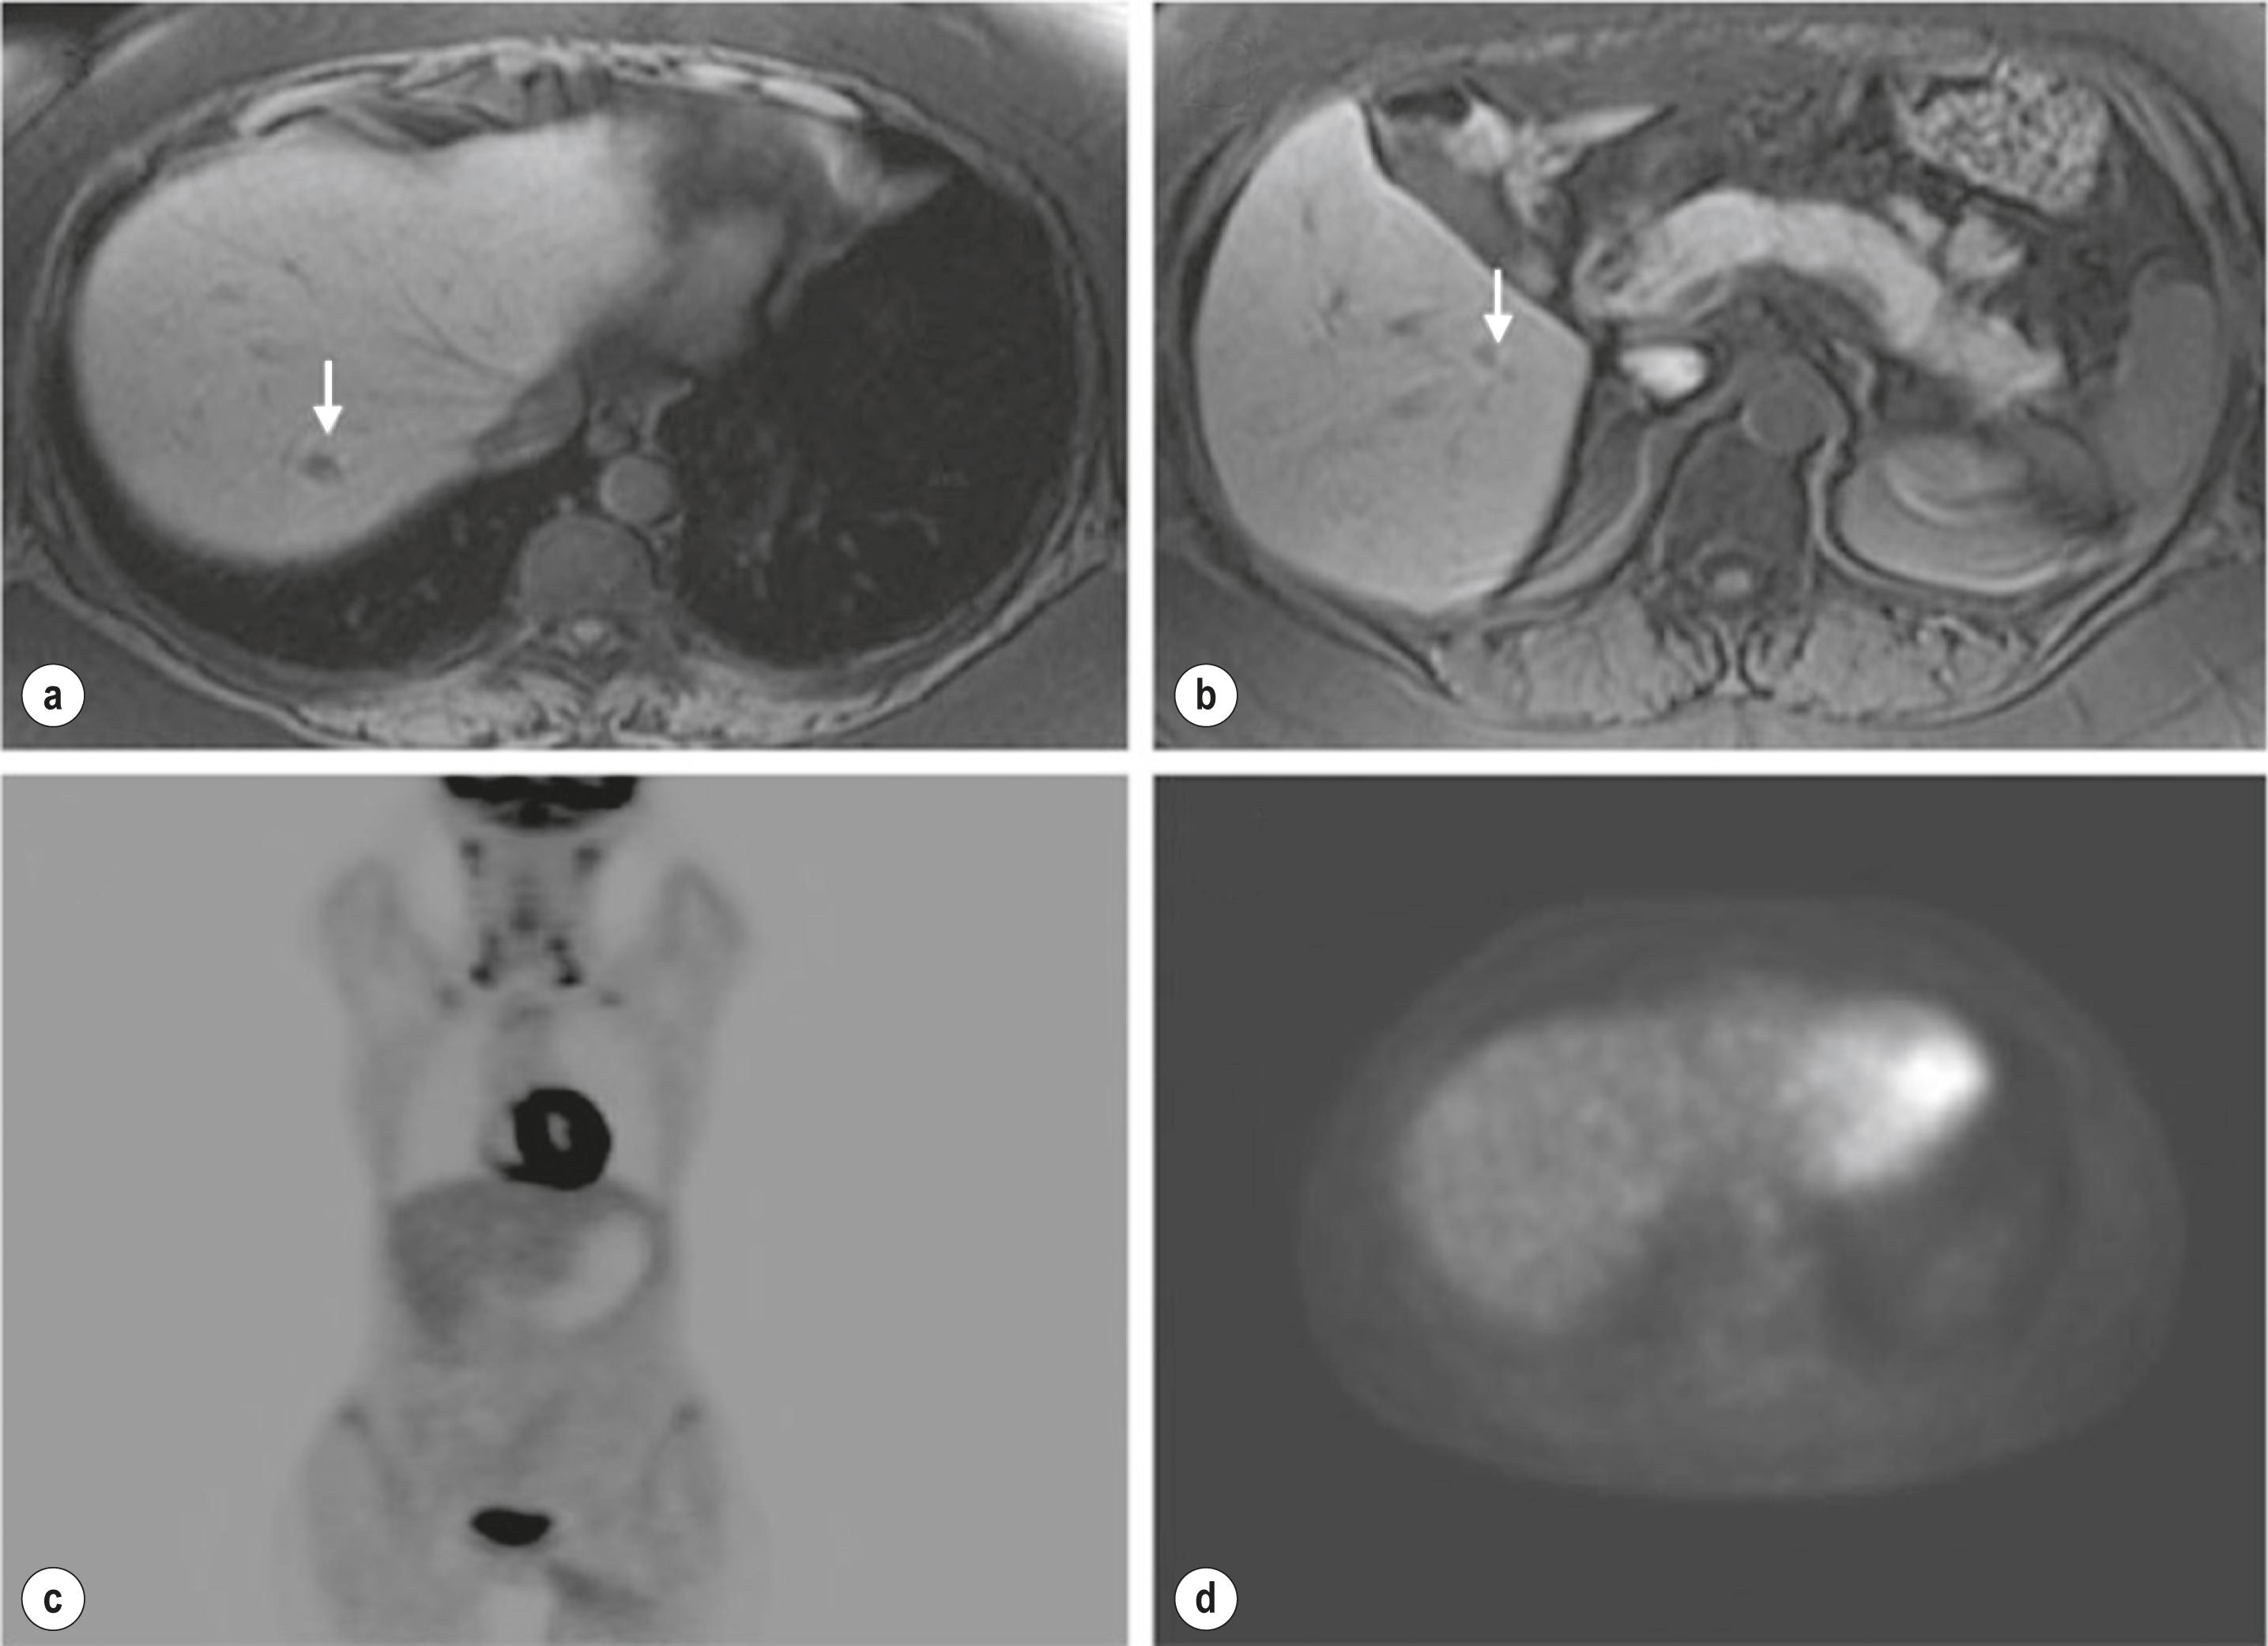 Figure 7.6, Small colorectal liver metastasis without increased FDG uptake in a 47-year-old woman. MRI of the liver shows two small metastatic deposits (arrow) in the right liver (a, b) . Representative coronal and axial images from a whole-body FDG-PET examination (c, d) show no corresponding focal increased FDG uptake in the liver. FDG, fluorodeoxyglucose; MRI, magnetic resonance imaging; PET, positron emission tomography.